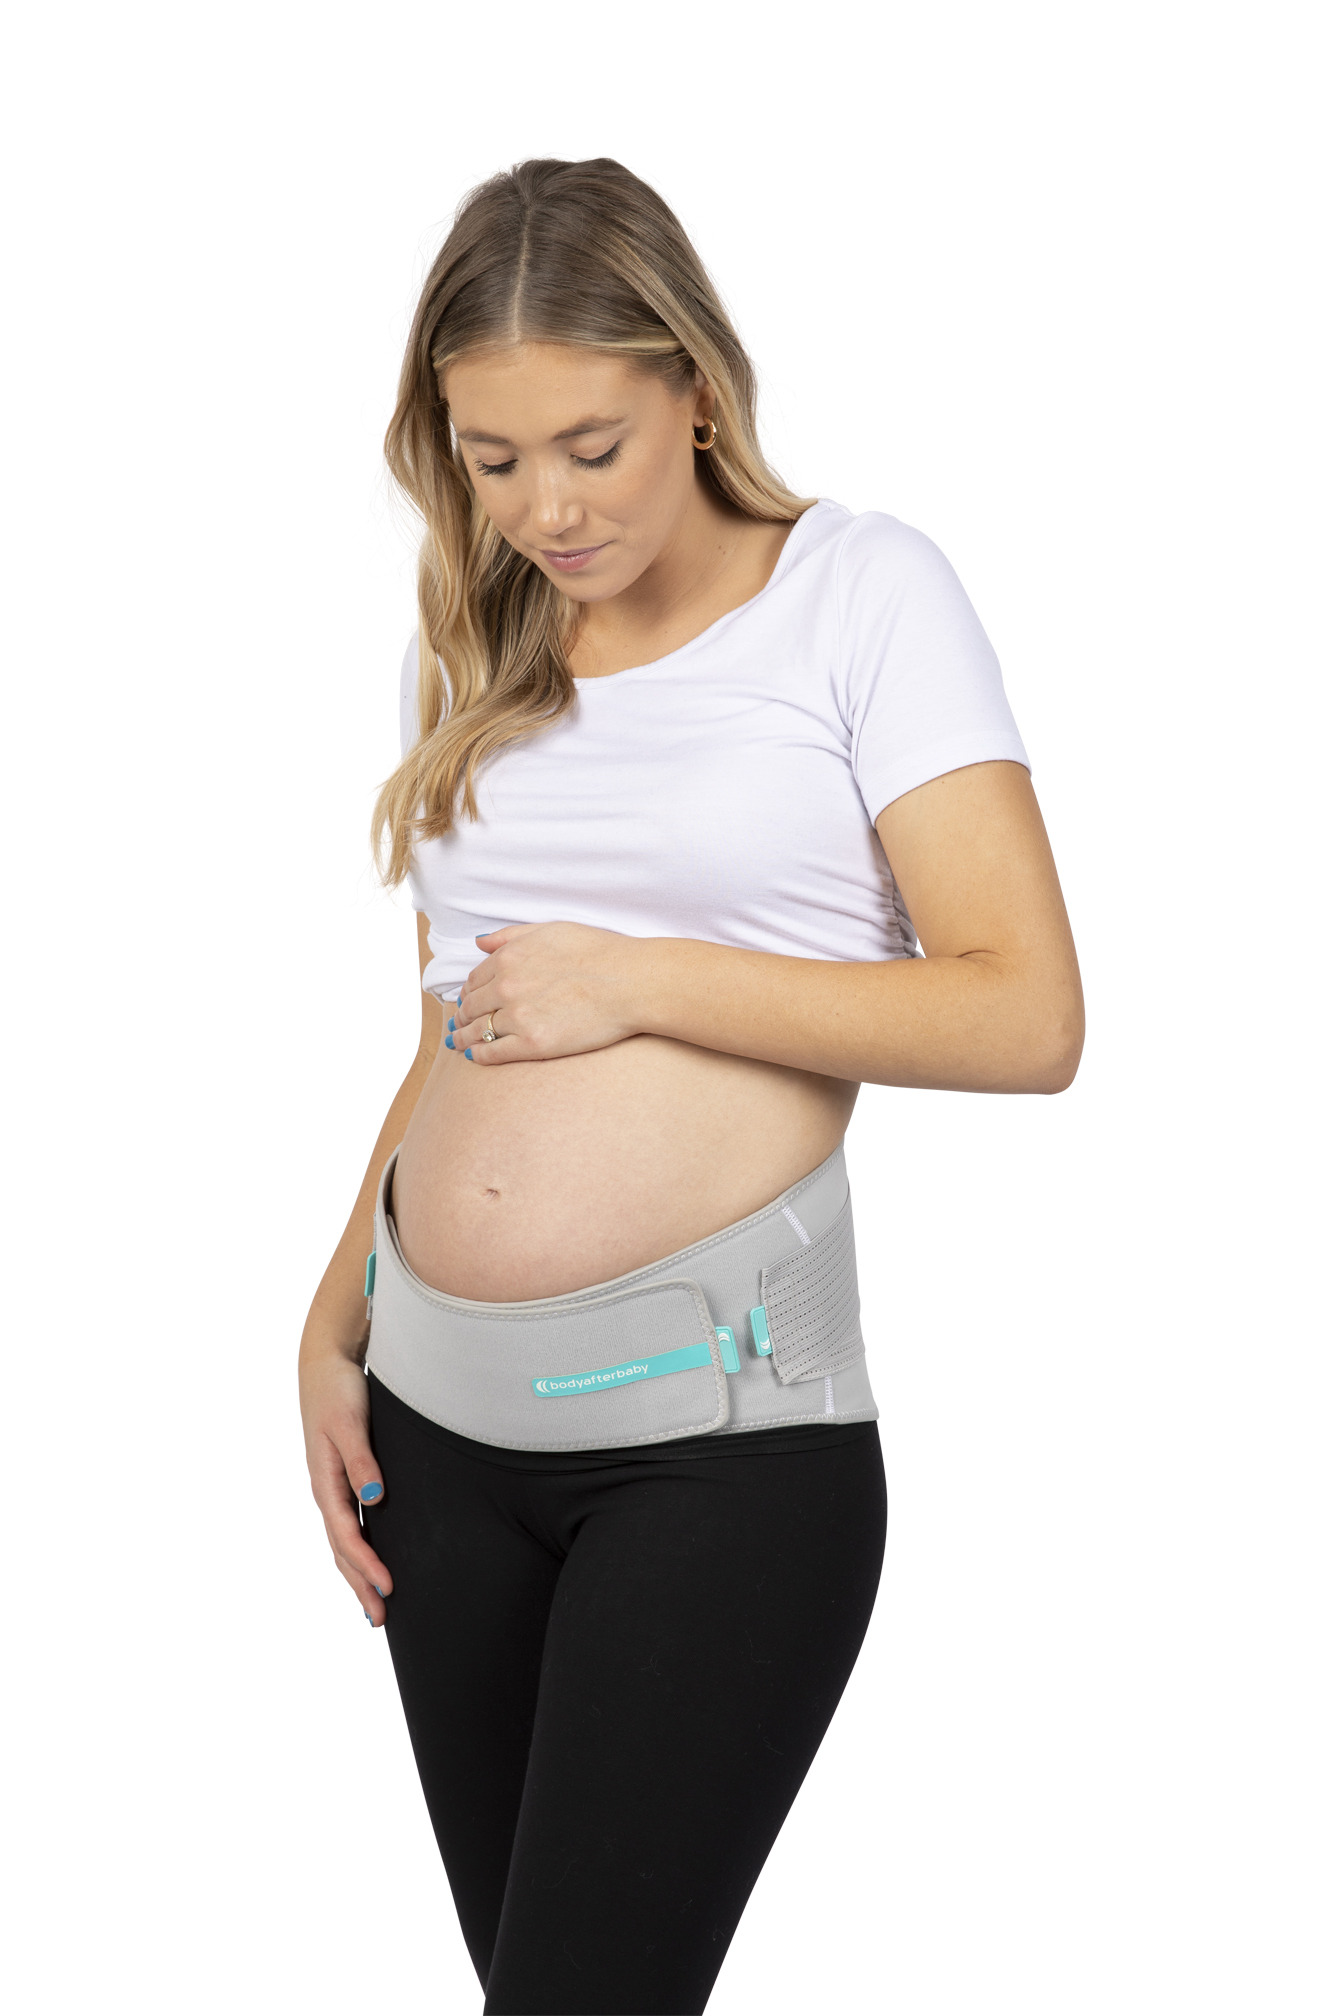 Maternity Support Band | The Breastfeeding Shop